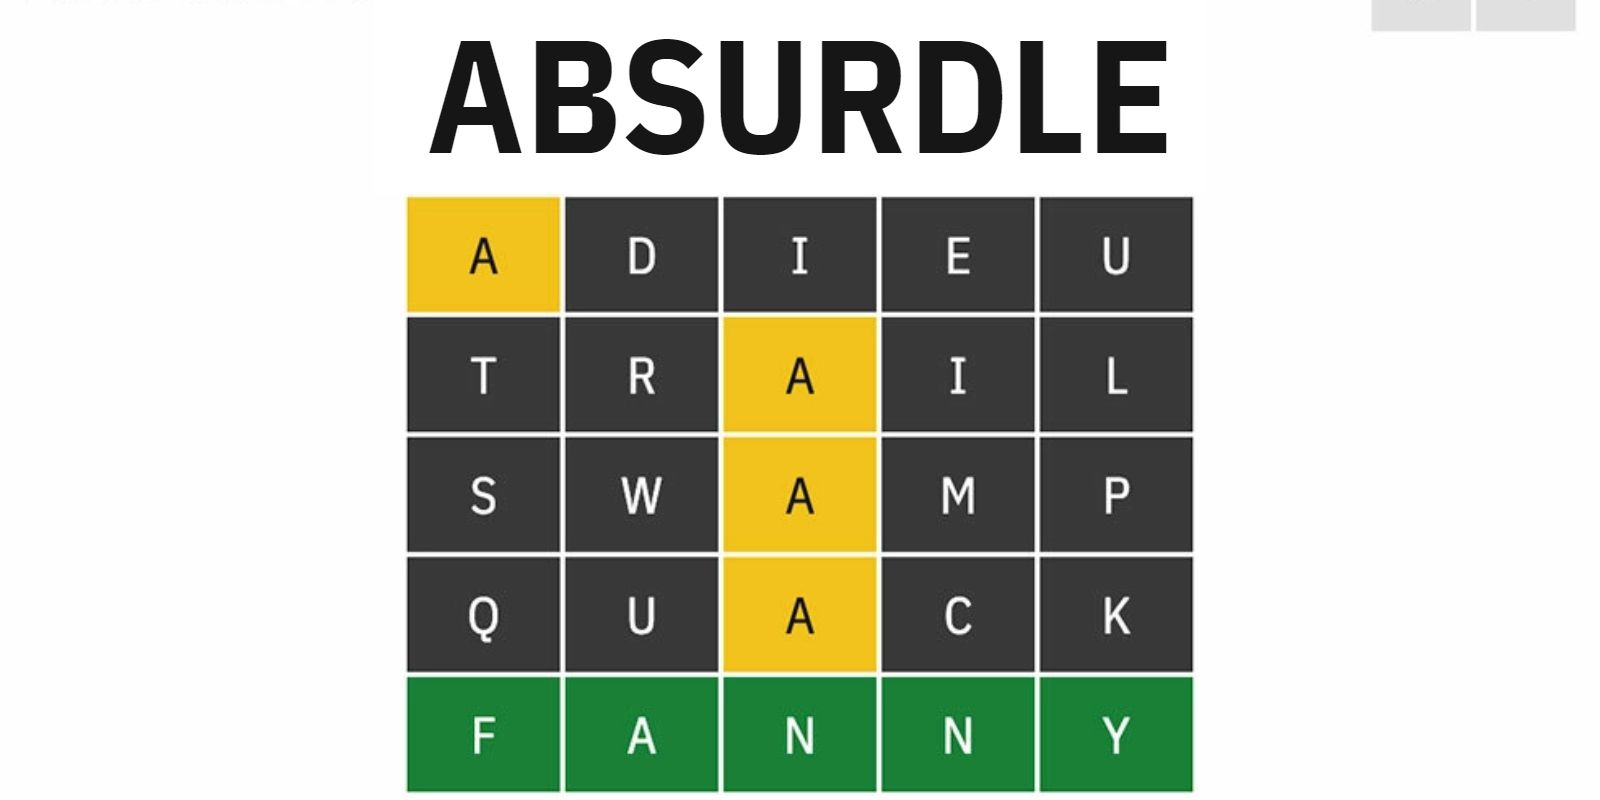 Wordle Daily Games You Can Play After Todays Word Absurdle